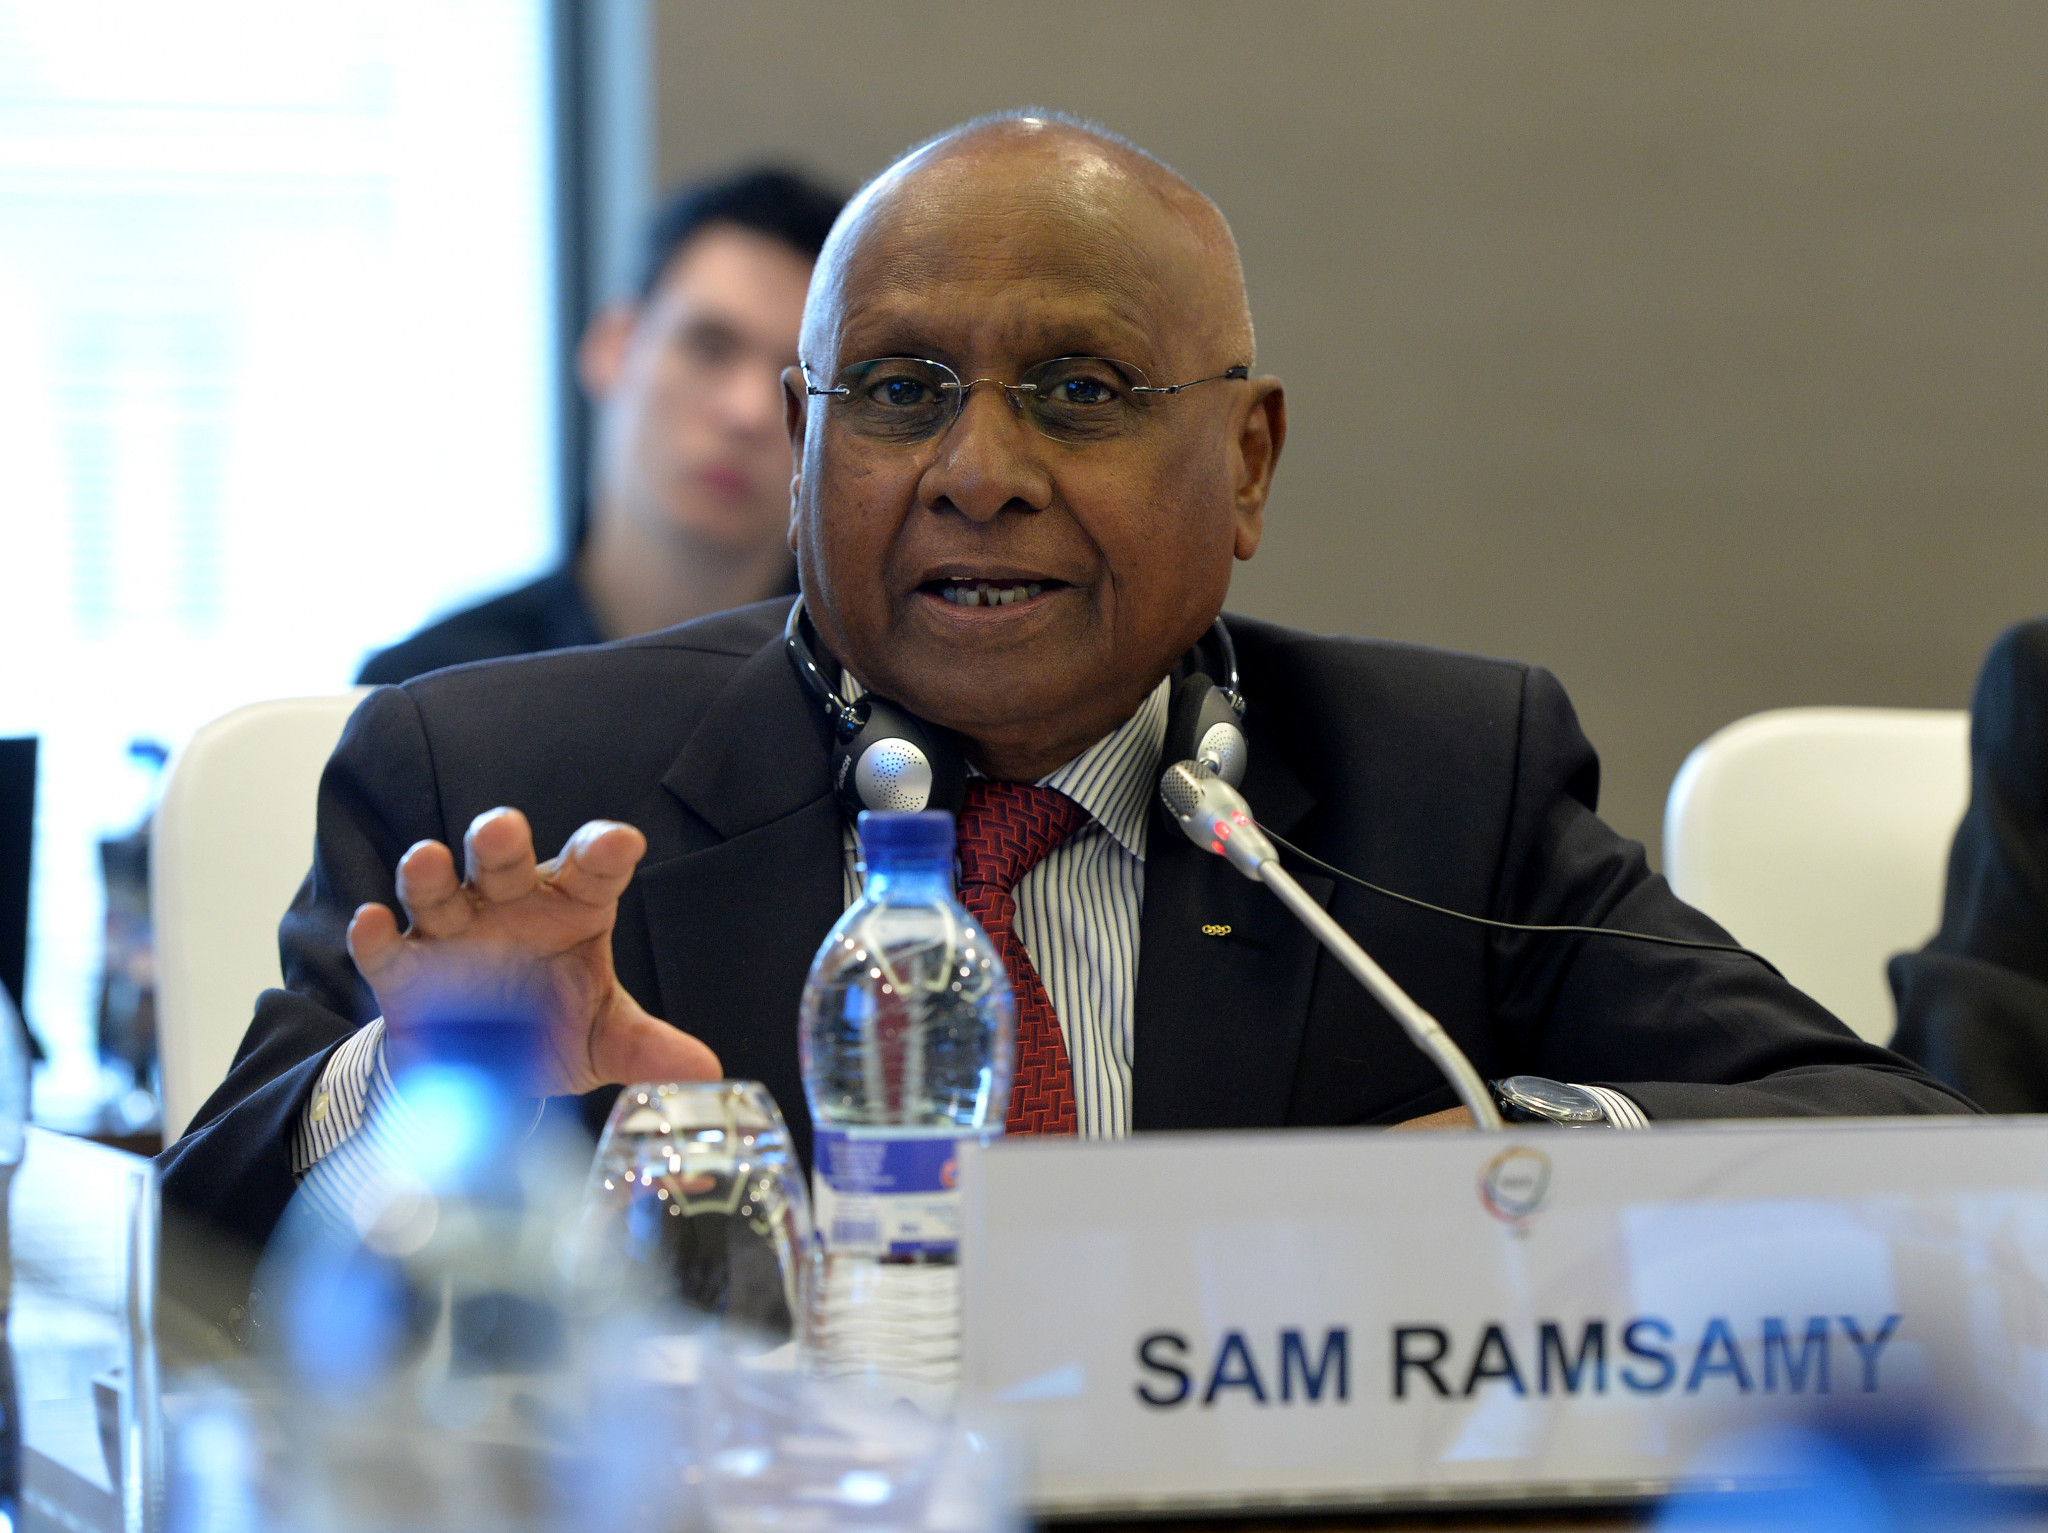 The IOC has defended its appointment of Sam Ramsamy ©Getty Images